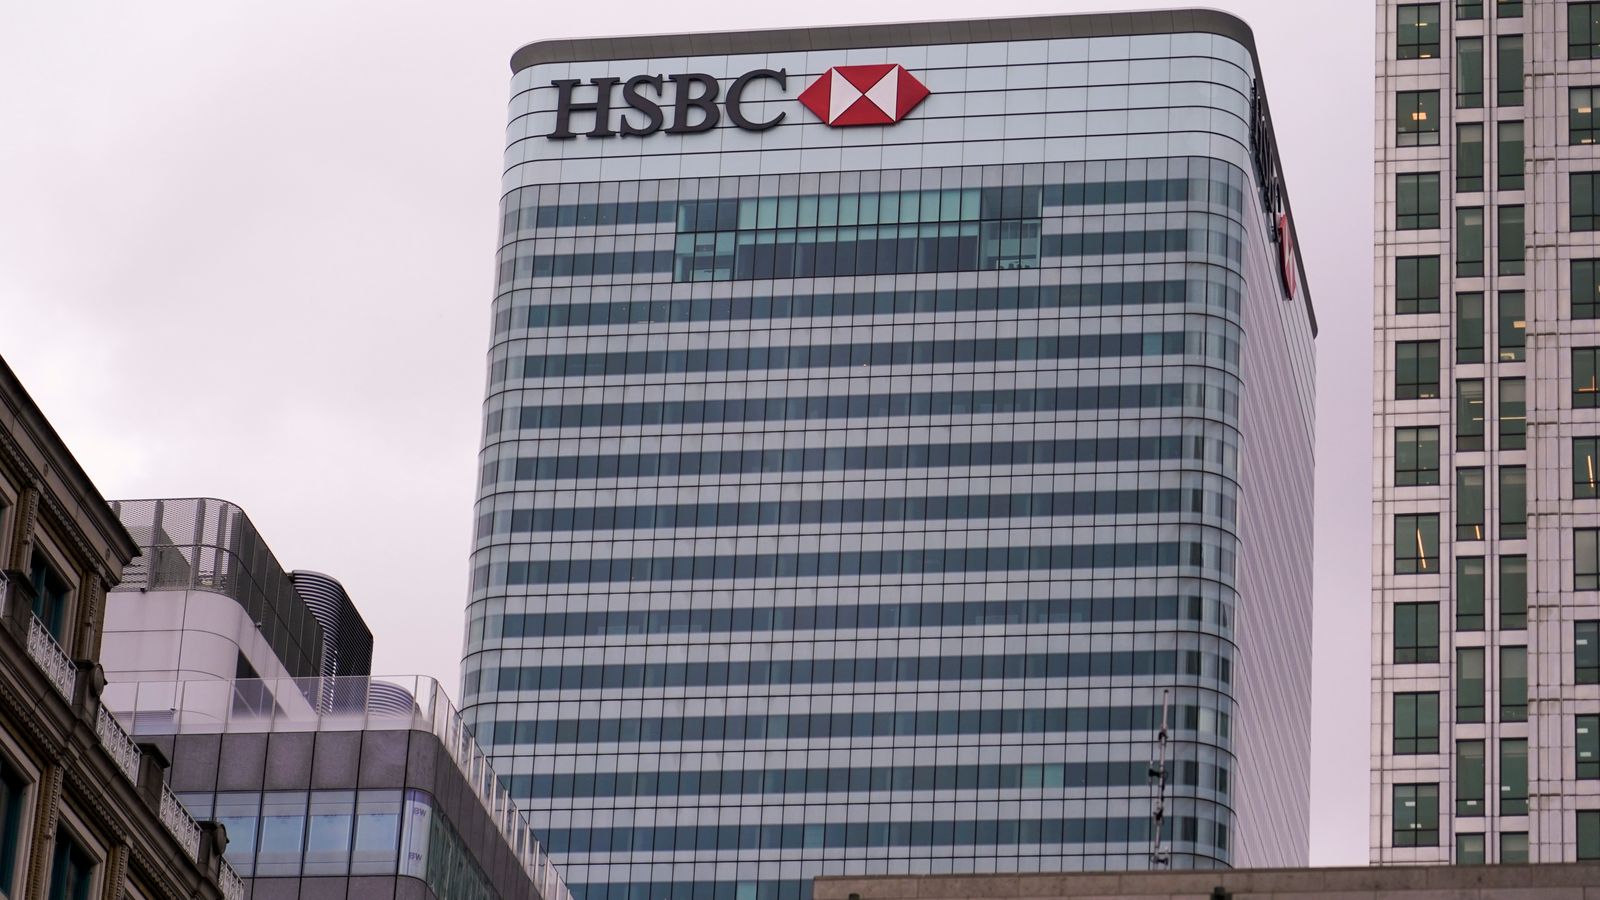 HSBC CEO Noel Quinn Announces Retirement After Five Intense Years, Quarterly Profits Slightly Down